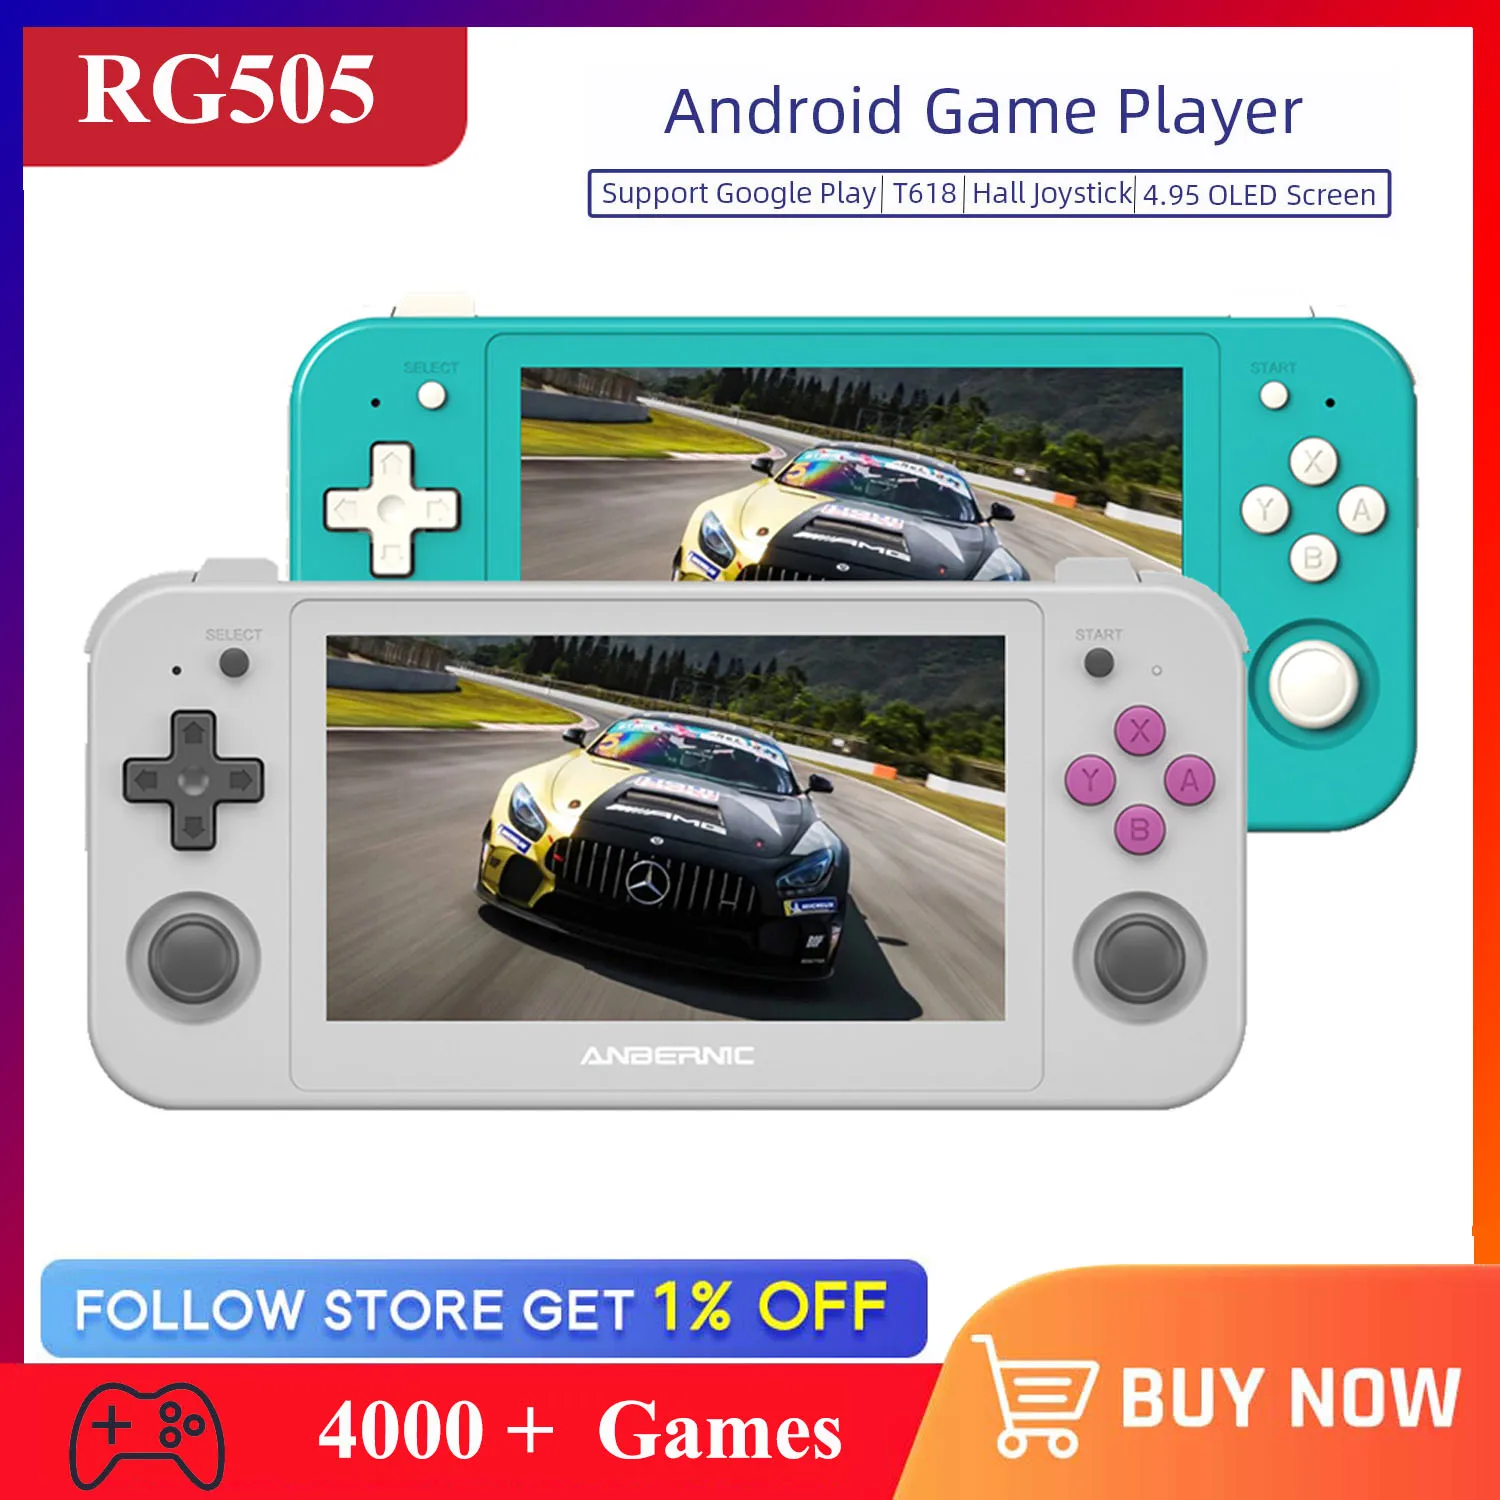 ANBERNIC RG505 Retro Handheld Game Console Android 12 System OLED Touch T618 4.95-INCH Portable Video Game Consoles 4000+ Games